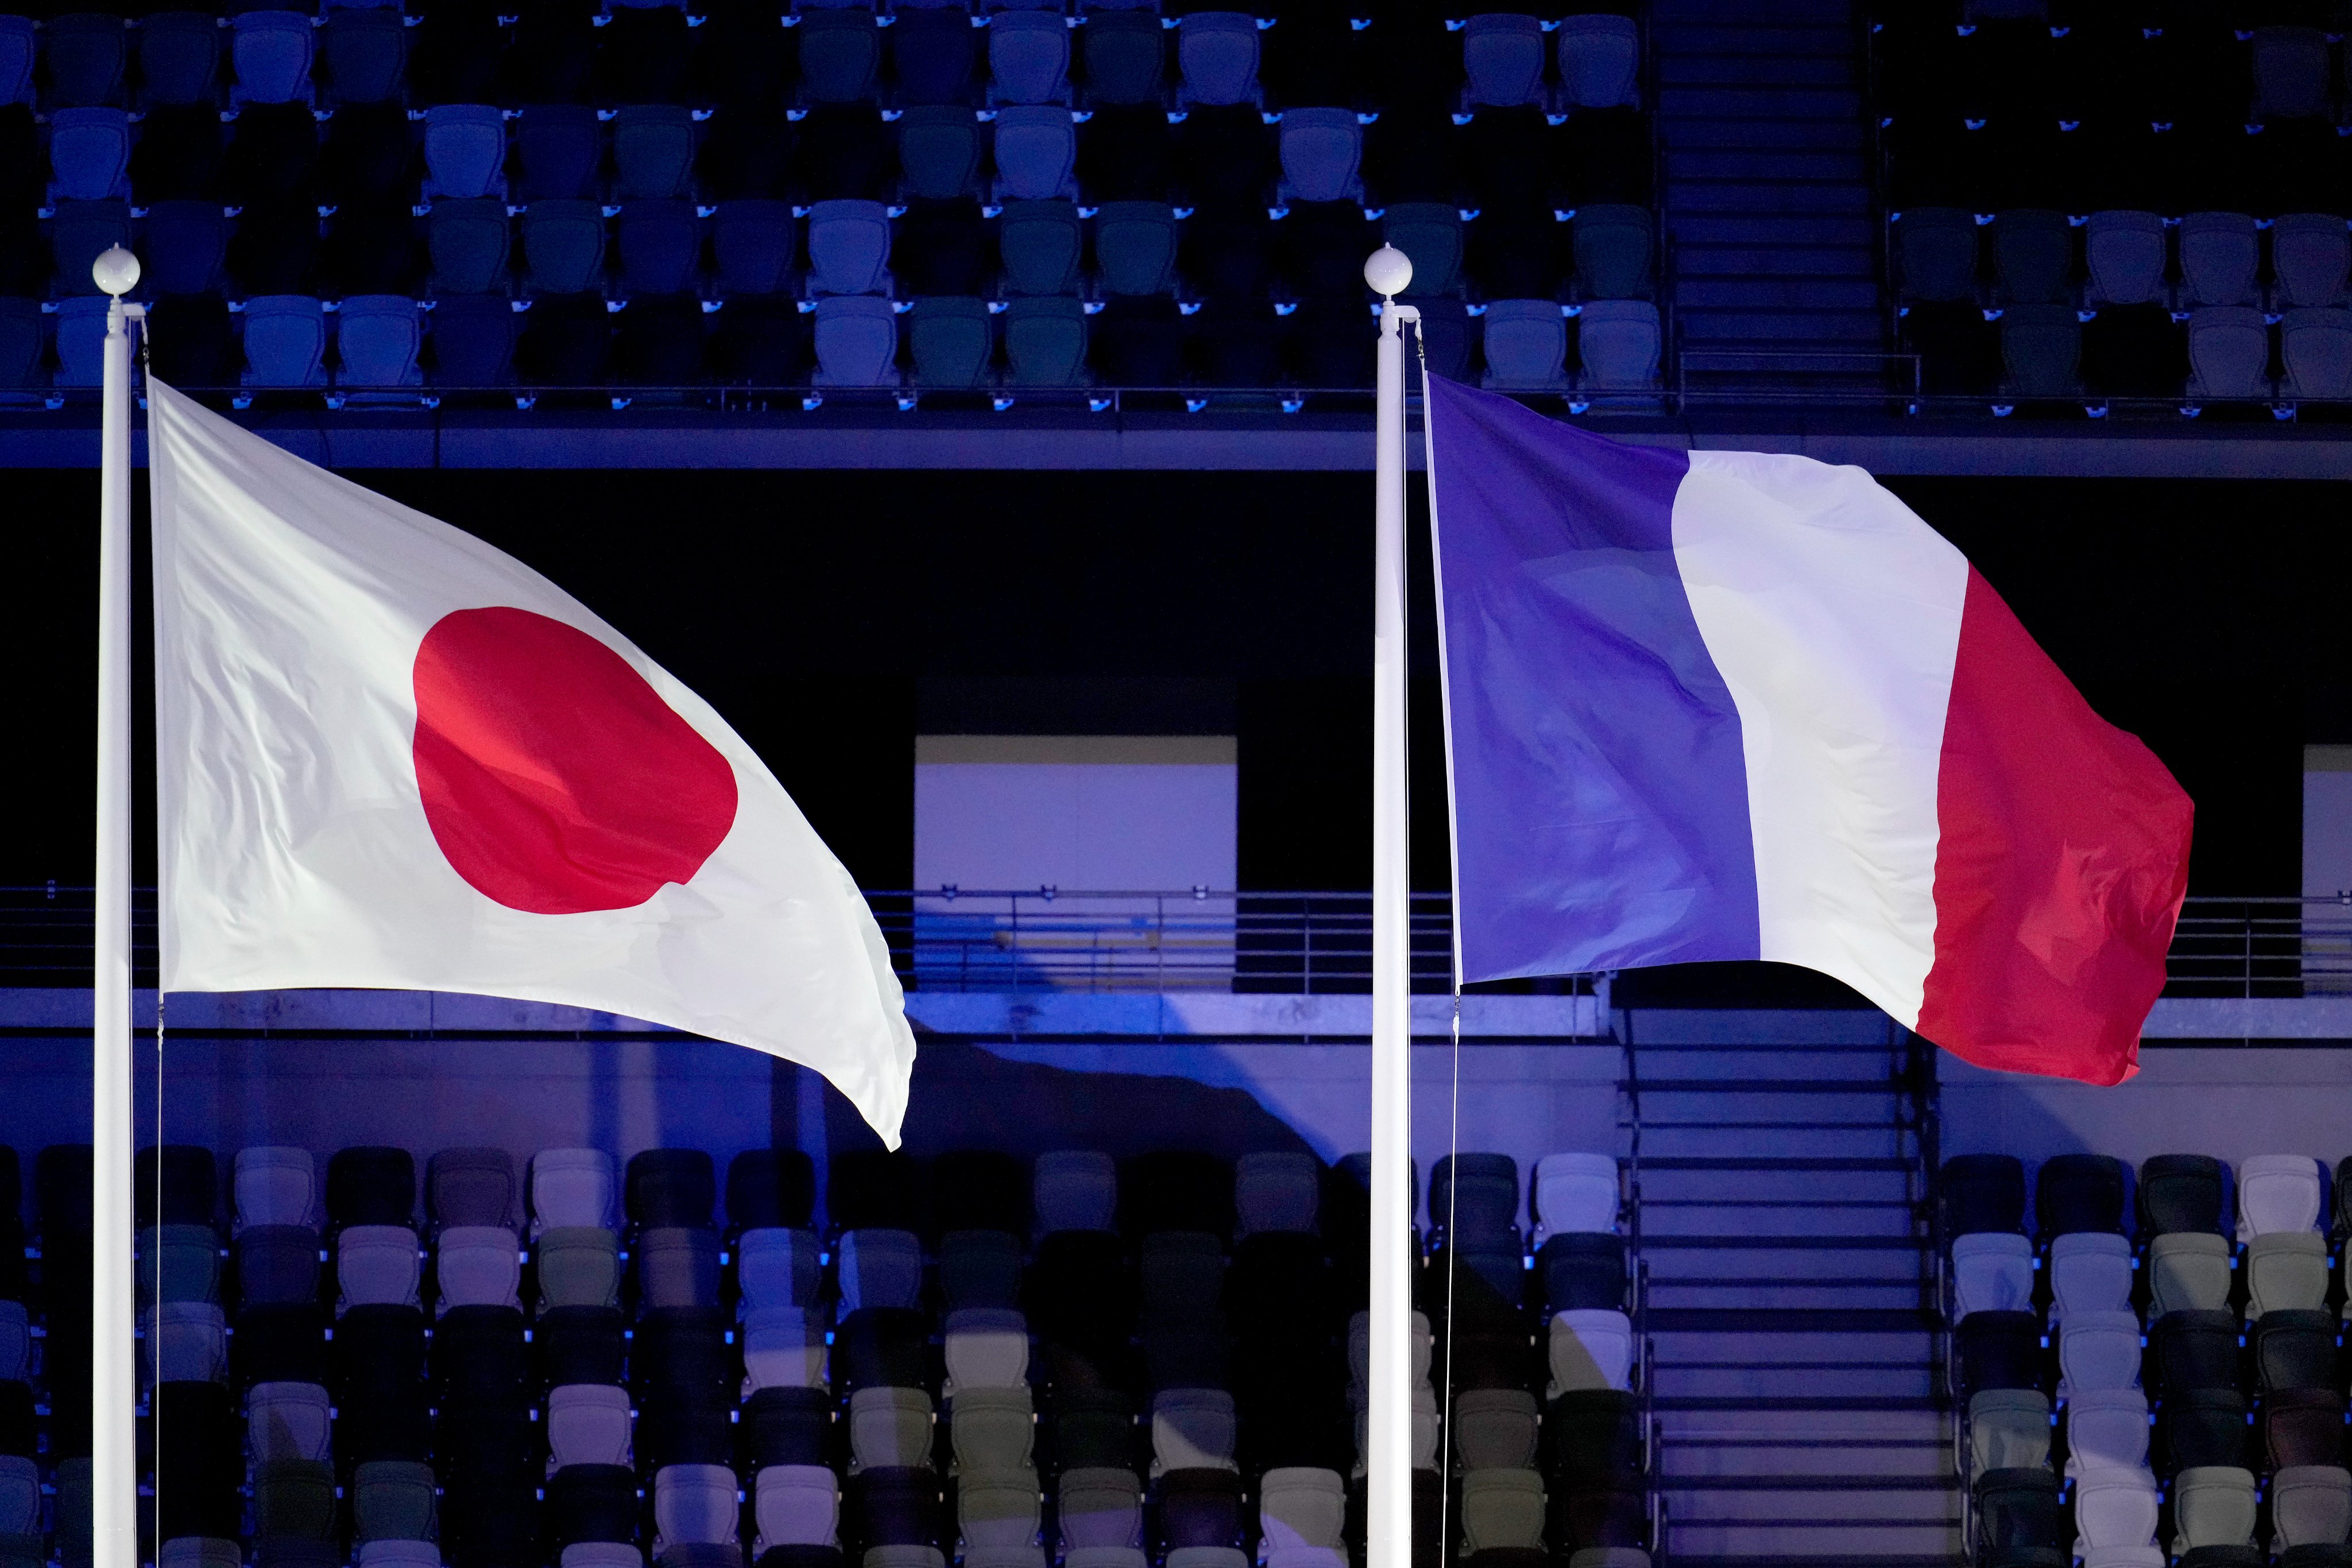 The japan and france flag fly in the staidum